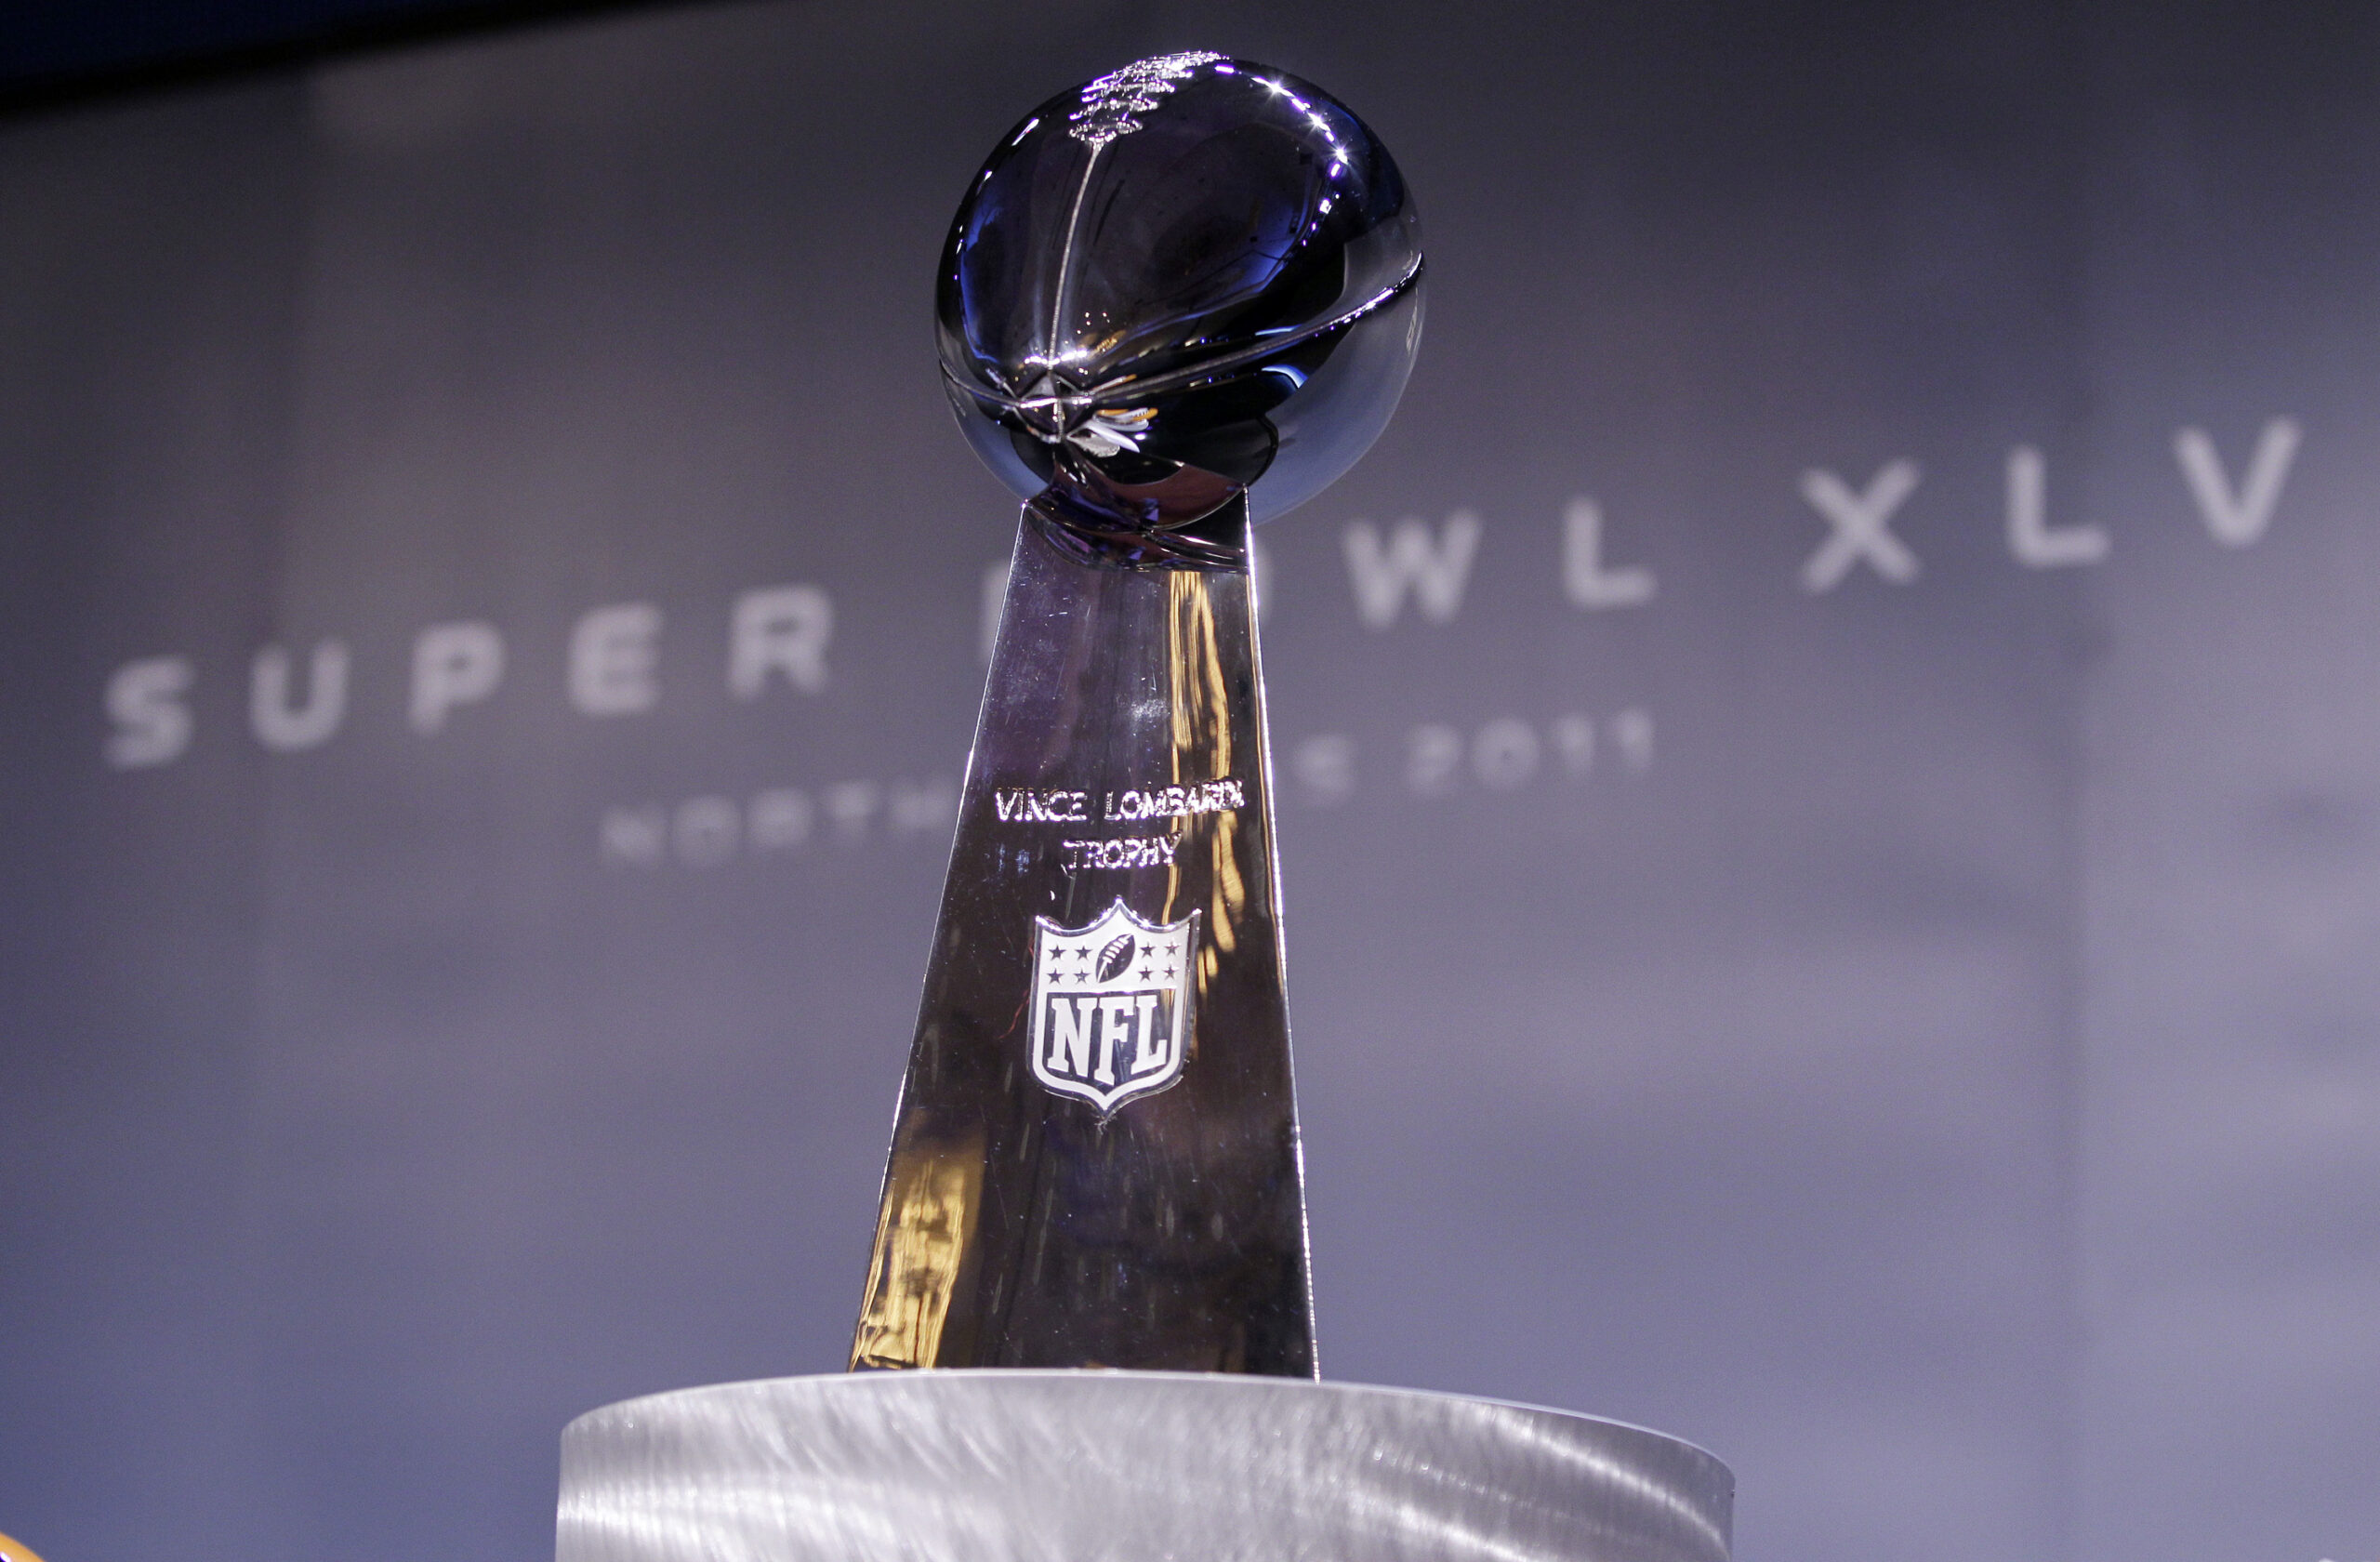 The Vince Lombardi Trophy stands between the helmets of the Pittsburgh Steelers and the Green Bay Packers at a Press Conference in Dallas